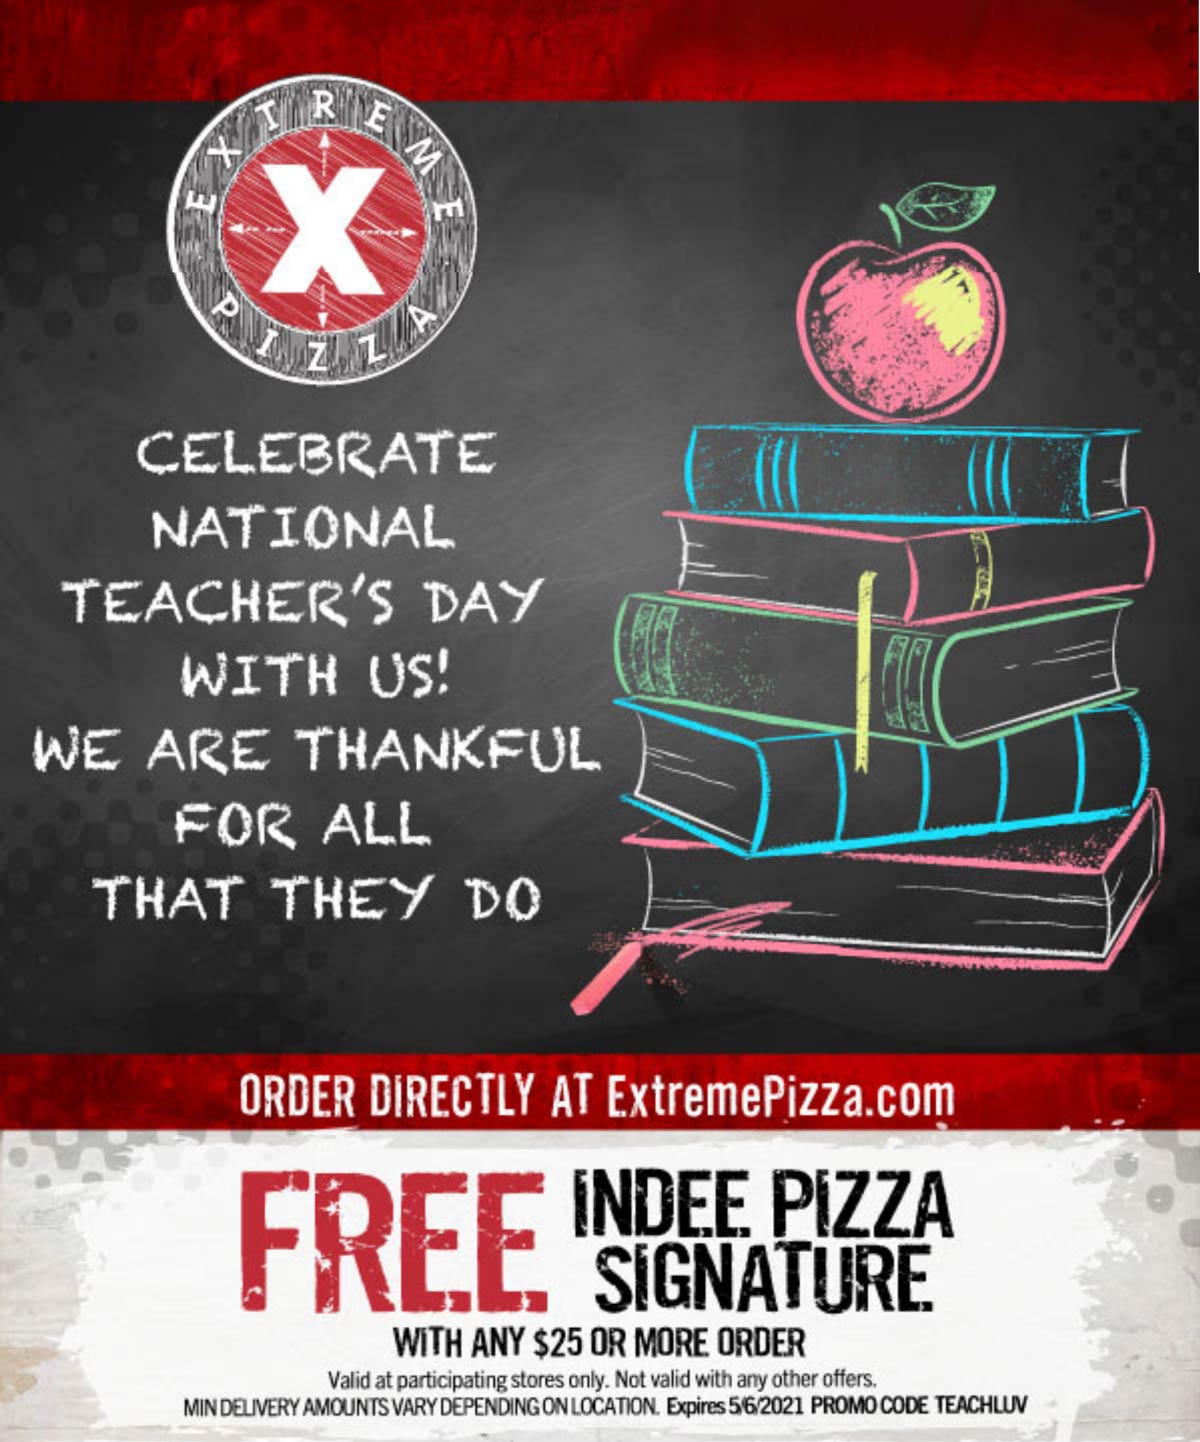 Extreme Pizza restaurants Coupon  Free indee pizza with $25 spent at Extreme Pizza via promo code TEACHLUV #extremepizza 